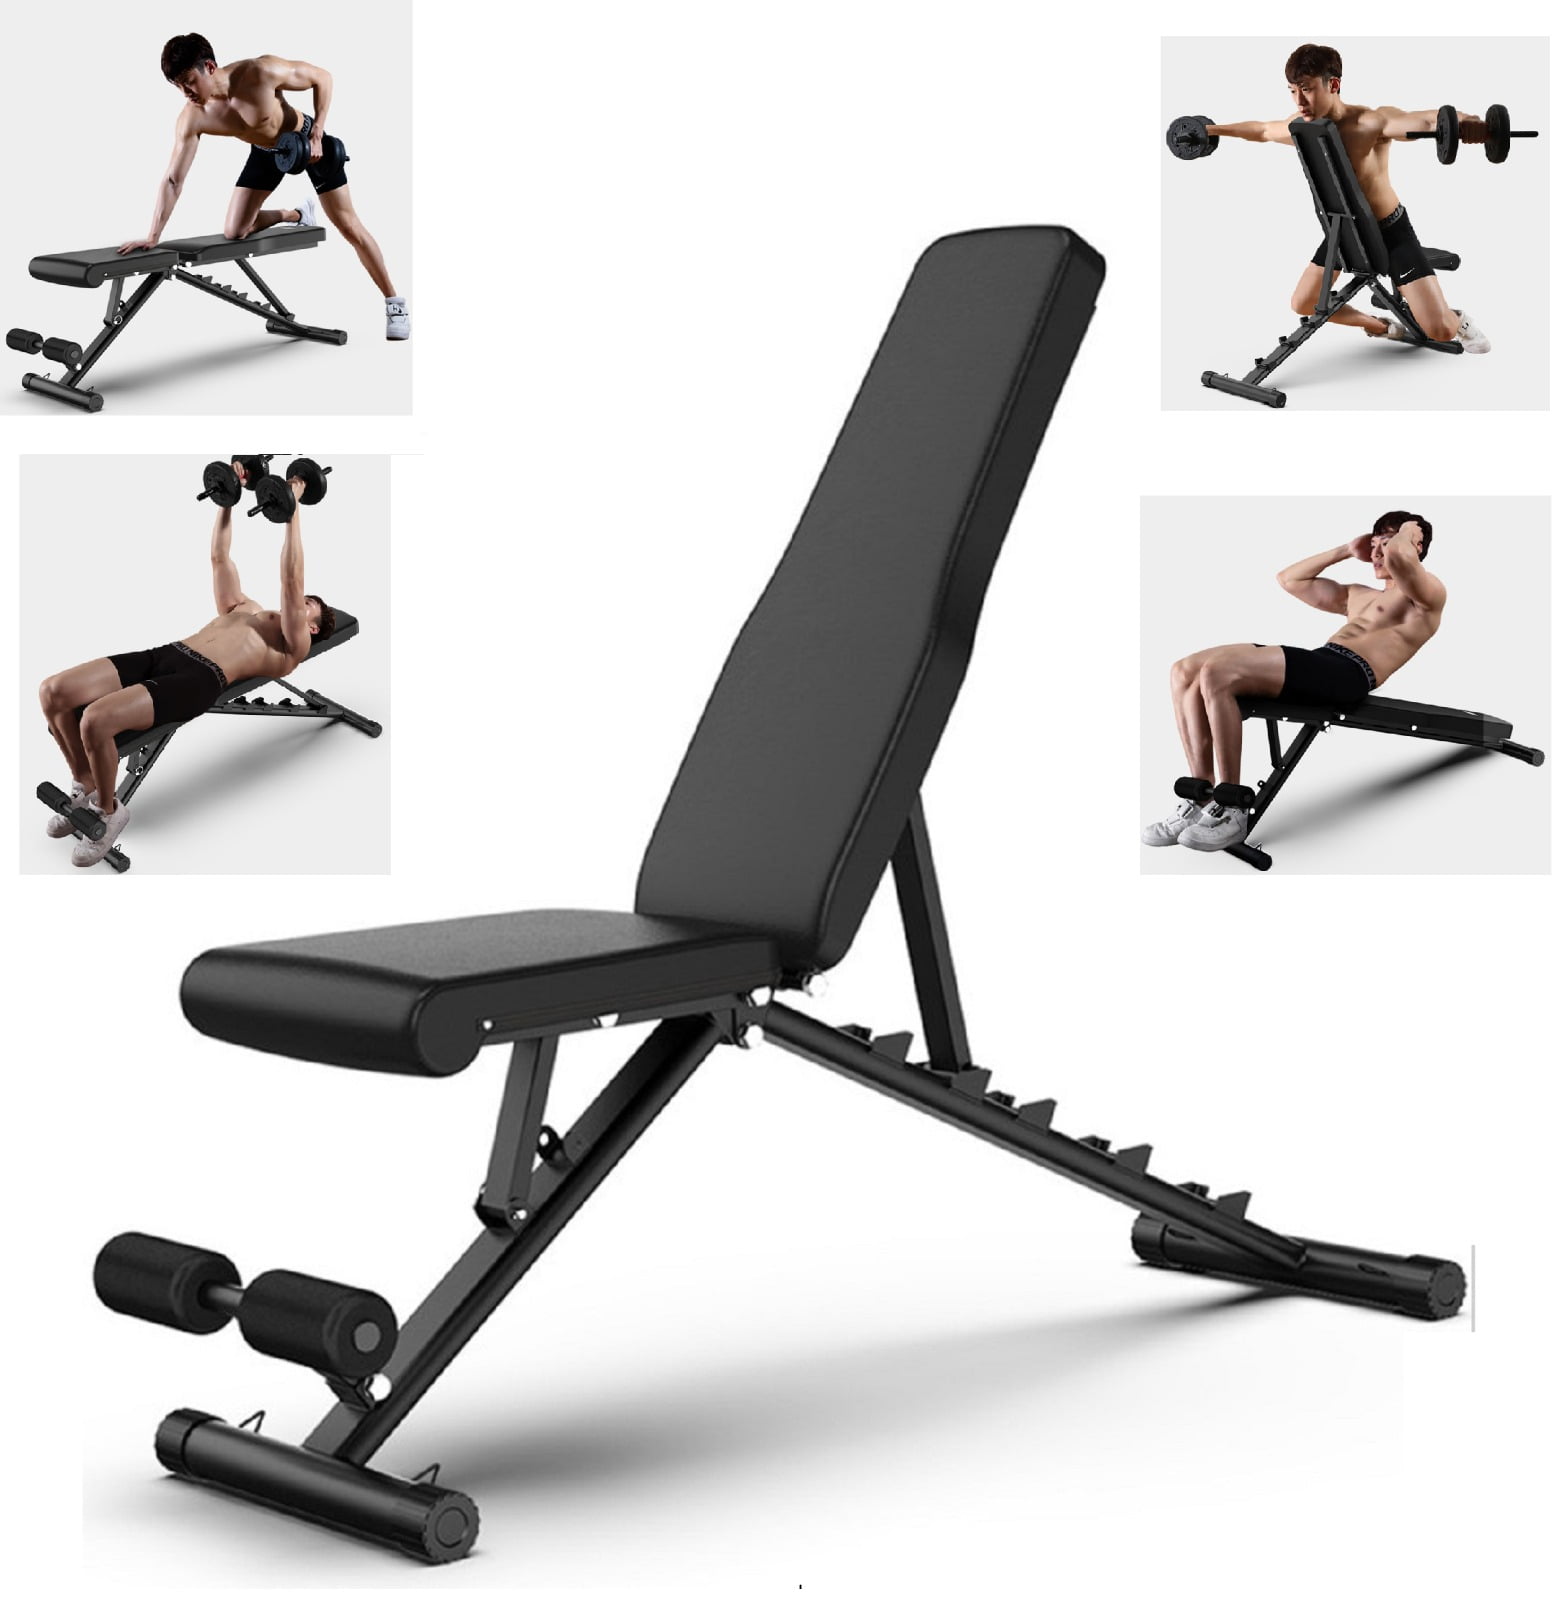 600 lbs Adjustable Utility Bench Weight Bench Home Gym Fitness Workout Exercise 